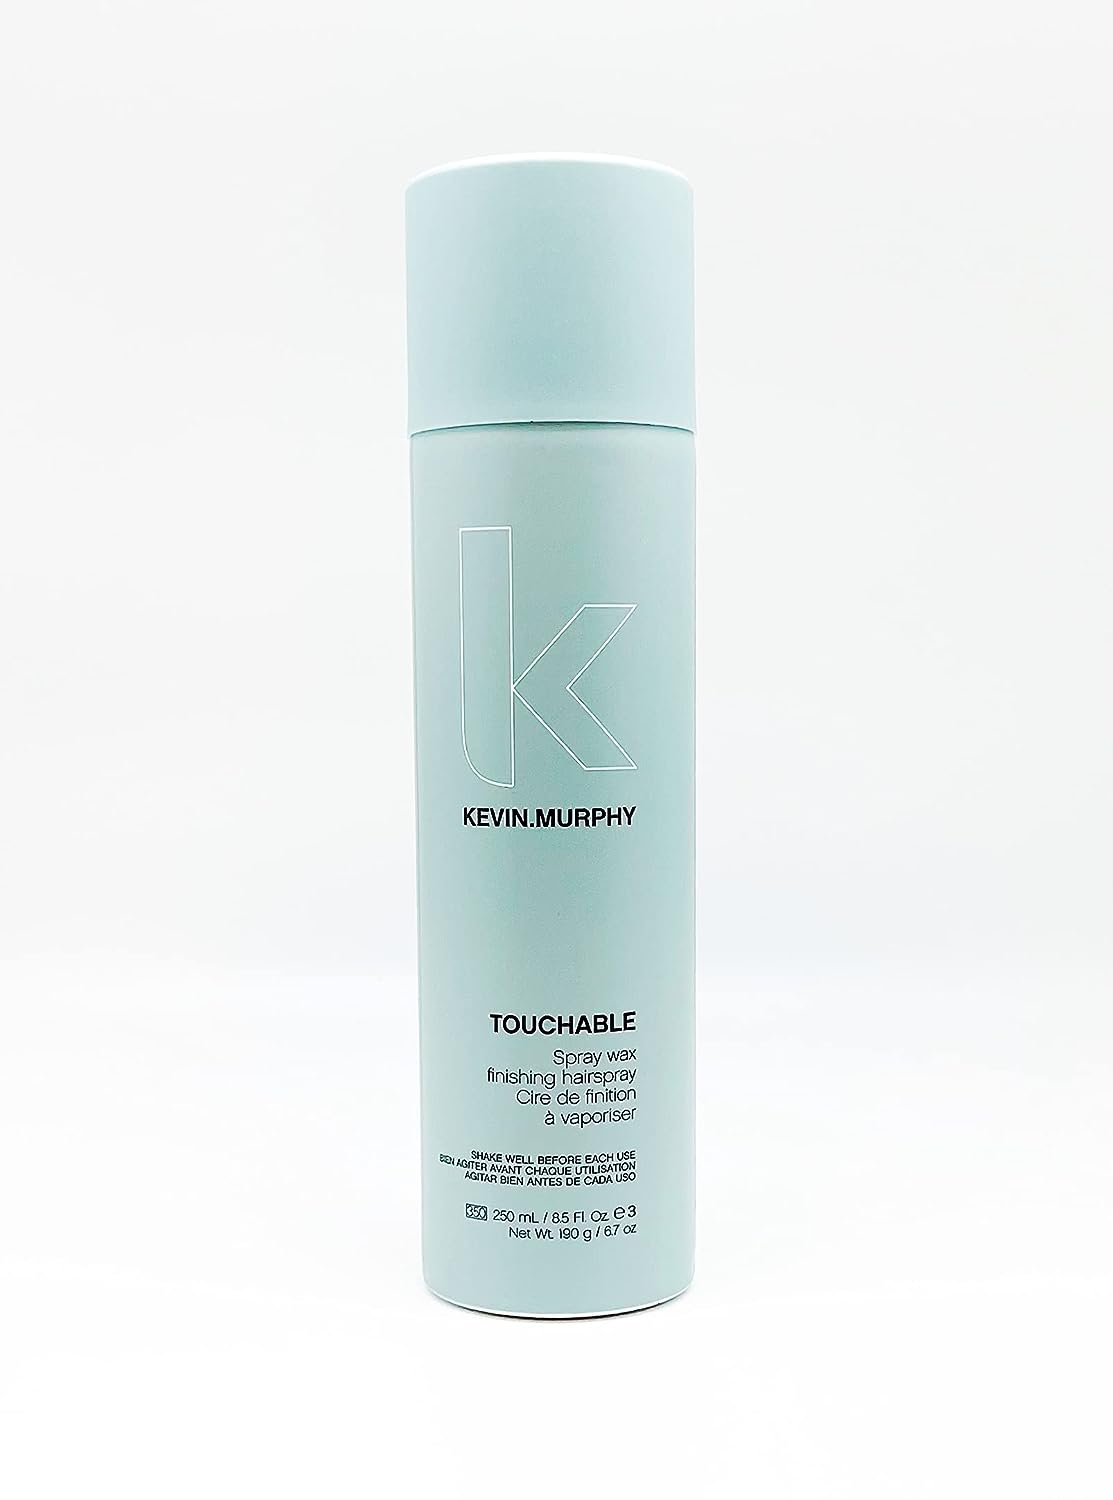 KEVIN MURPHY Touchable Spray Wax 8.5 oz